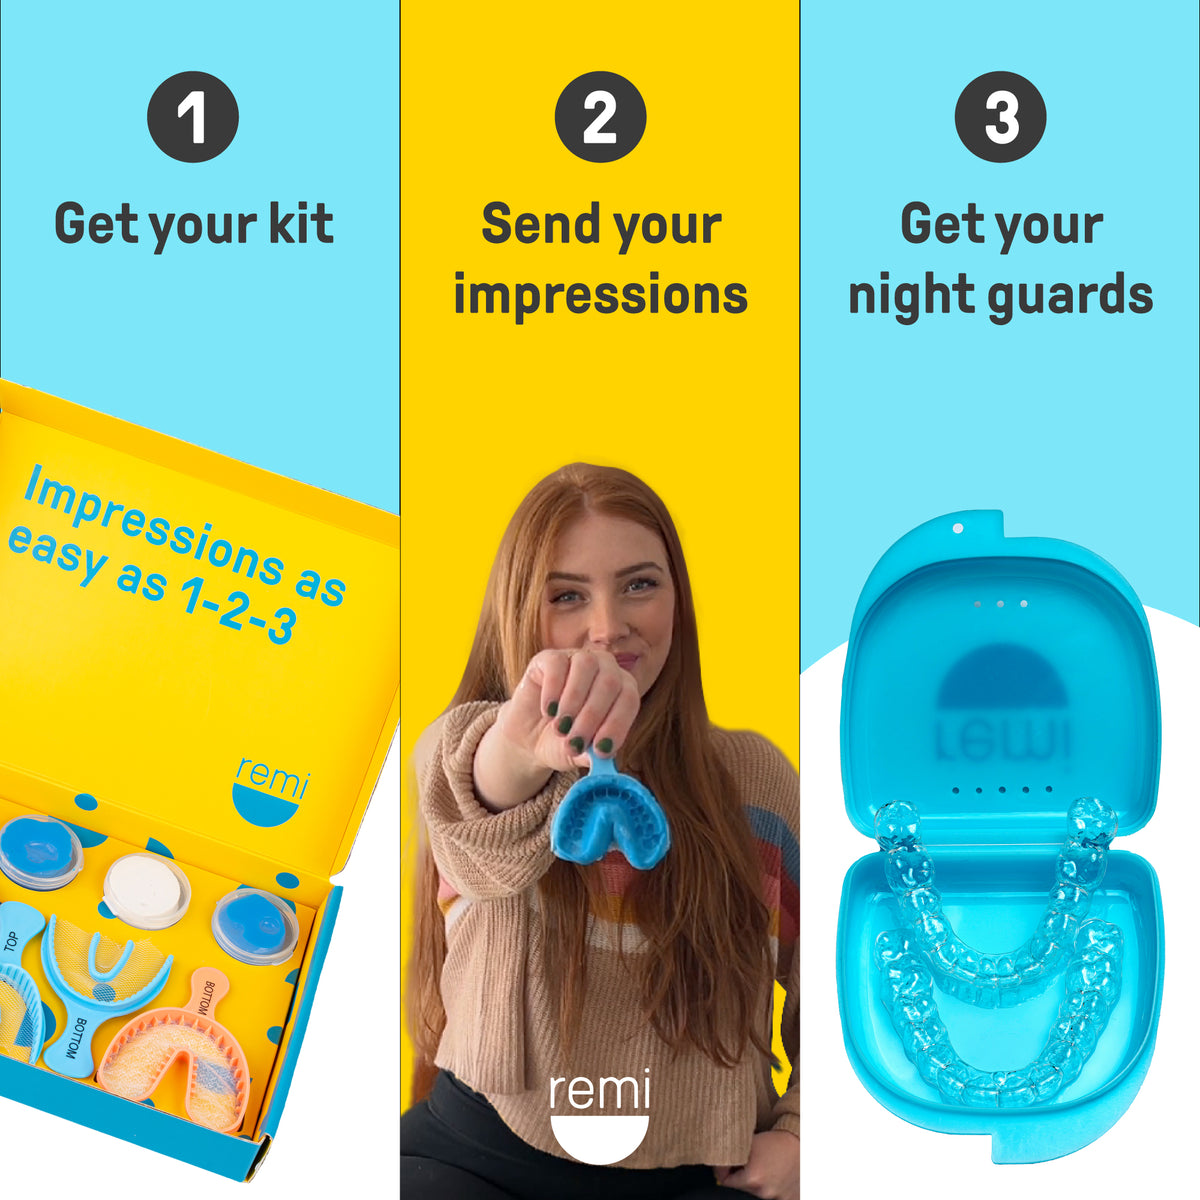 A woman holds a dental impression kit. Steps illustrate: 1. Get your Custom Night Guards kit, 2. Send your impressions, 3. Get your dental-grade night guards. An open box and night guards in a case are shown, offering relief from jaw pain through custom protection.